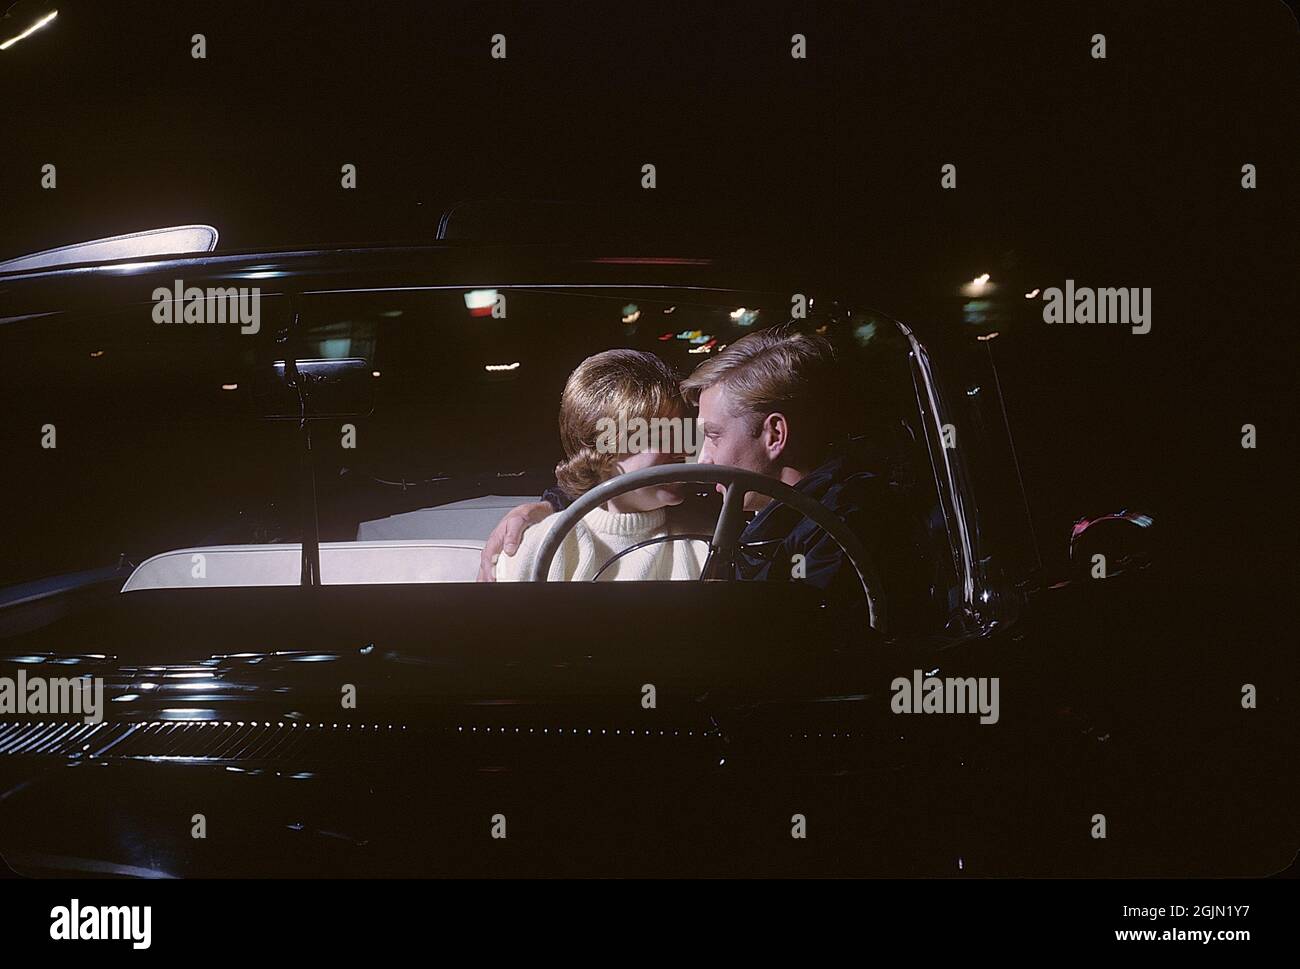 USA in the 1960s. A young couple in a convertible at night. They are sitting close together in the front seat of the car. Kodachrome slide original.   Credit Roland Palm ref 6-9-16 Stock Photo